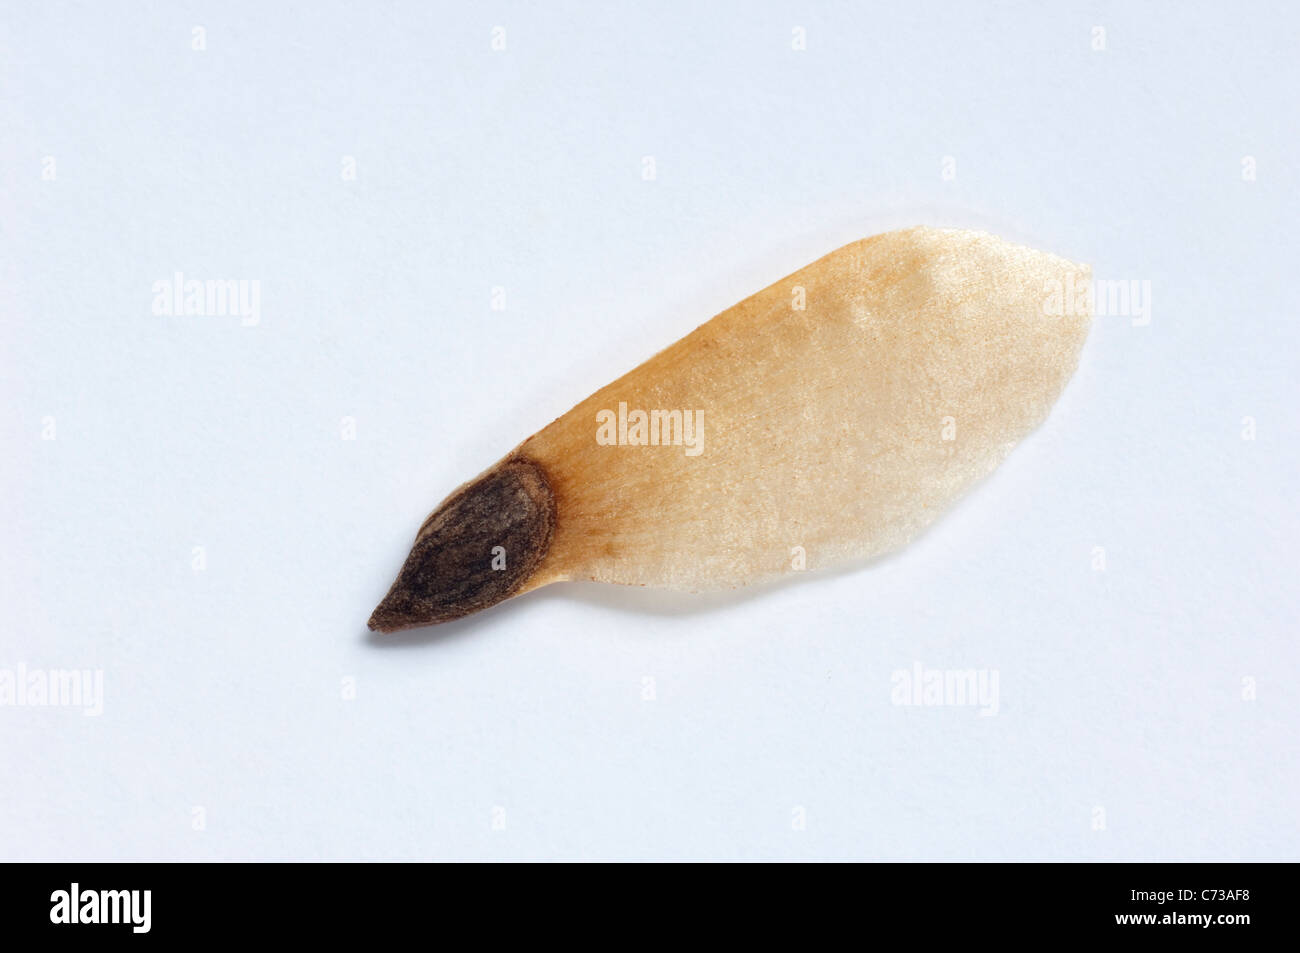 Common Spruce, Norway Spruce (Picea abies), seed. Studio picture against a white background. Stock Photo